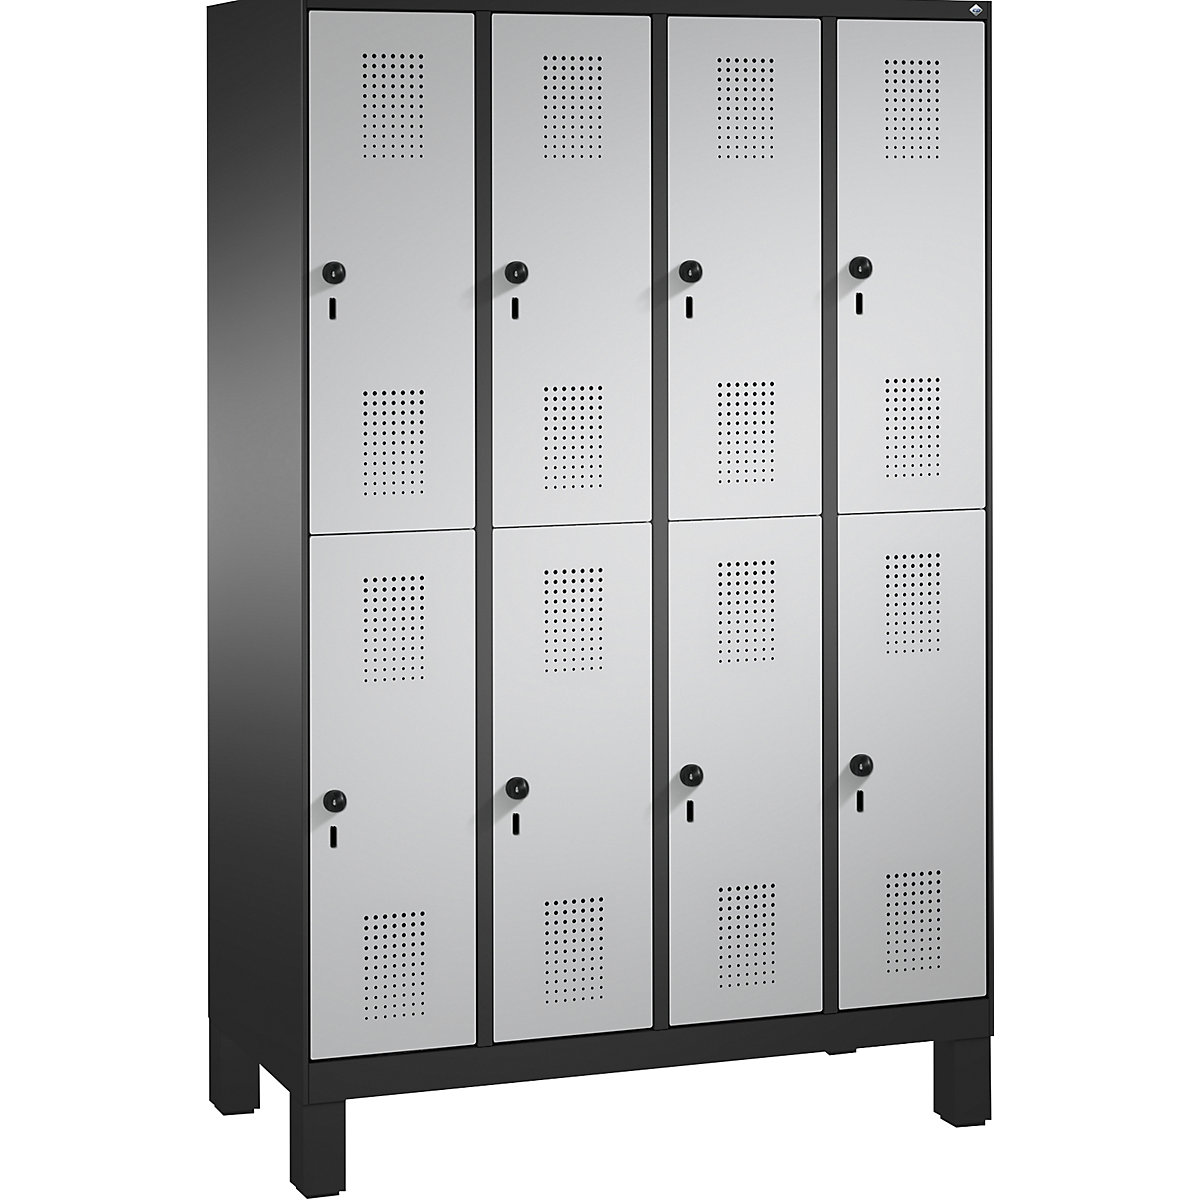 EVOLO cloakroom locker, double tier, with feet – C+P, 4 compartments, 2 shelf compartments each, compartment width 300 mm, black grey / white aluminium-9